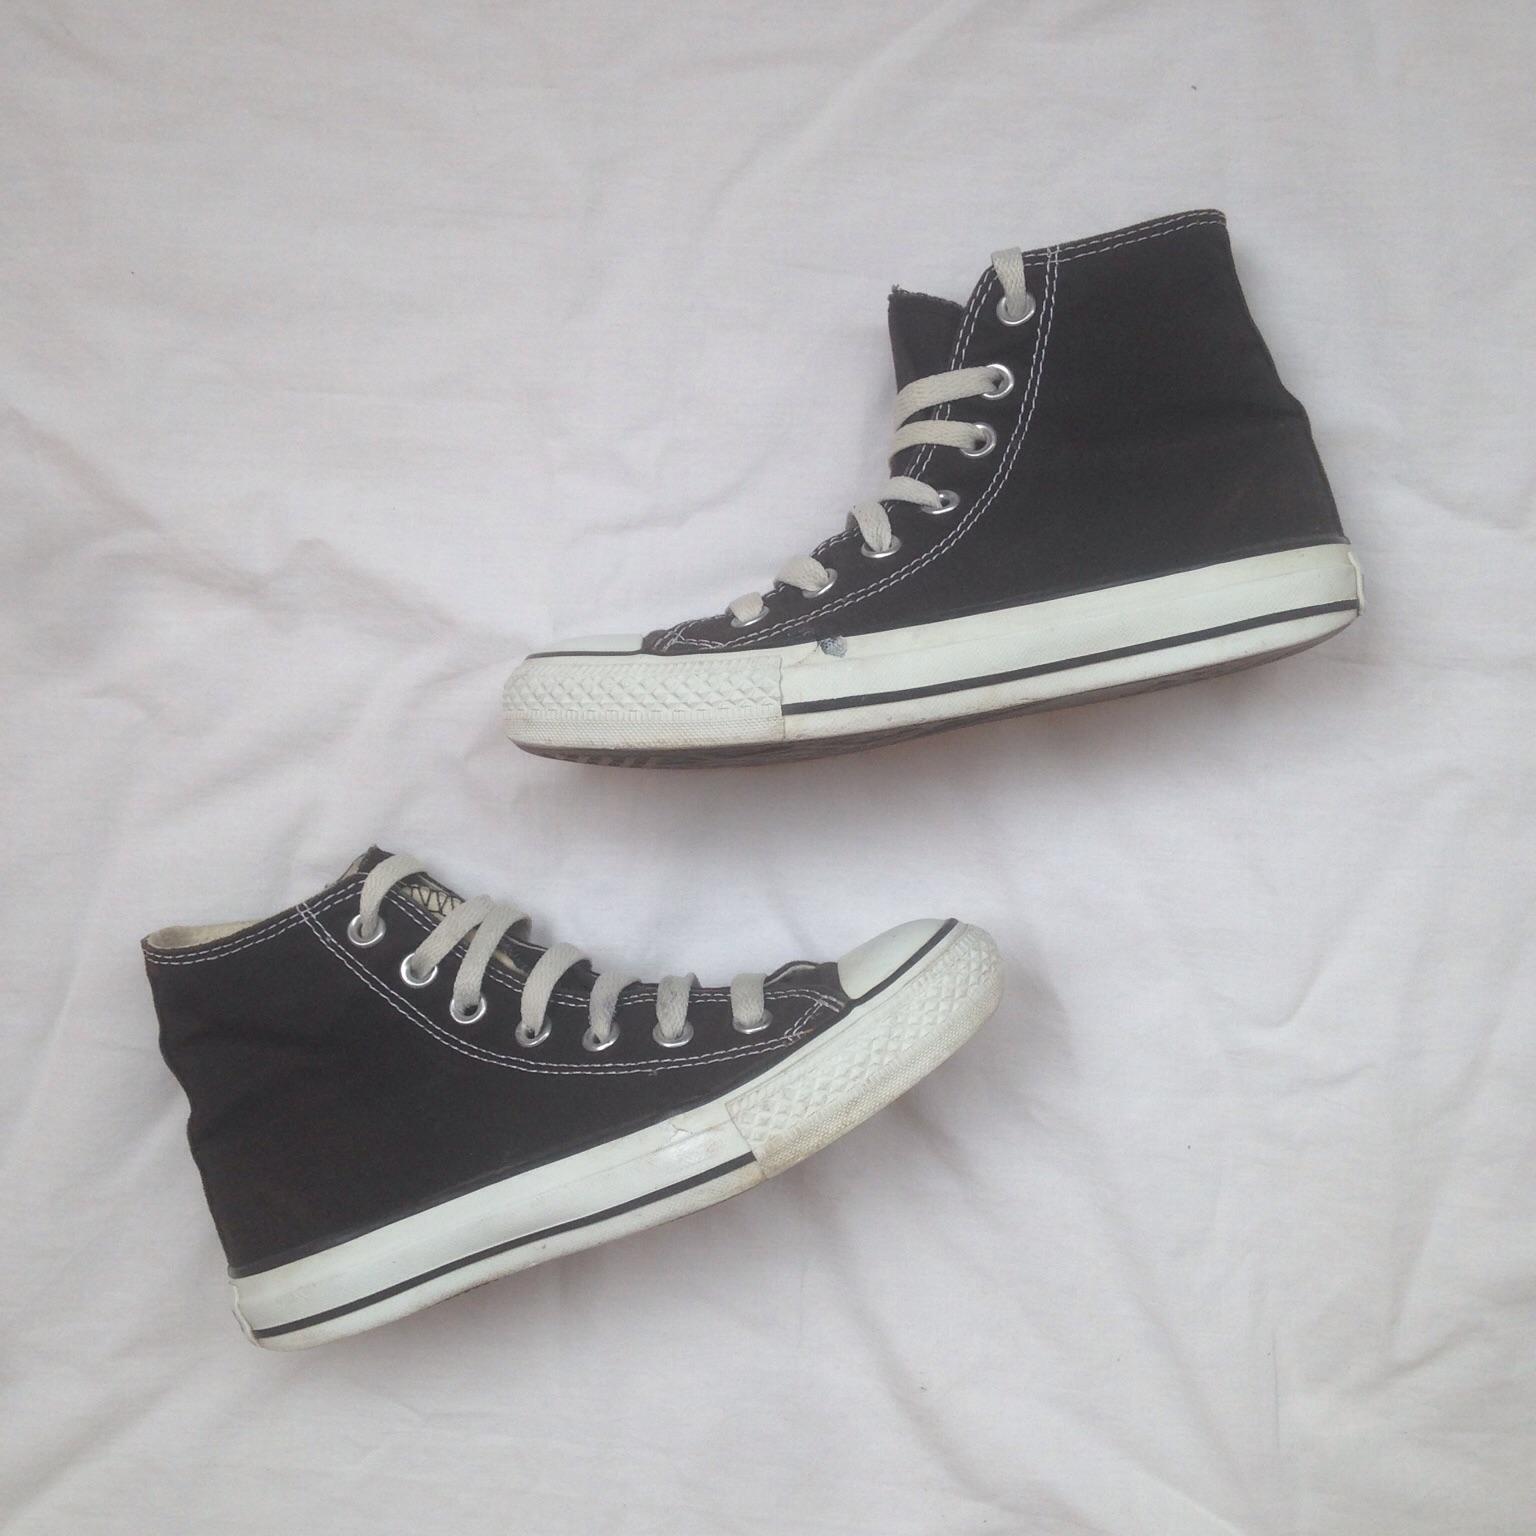 Converse alte nere in 35010 Cadoneghe for €55.00 for sale | Shpock